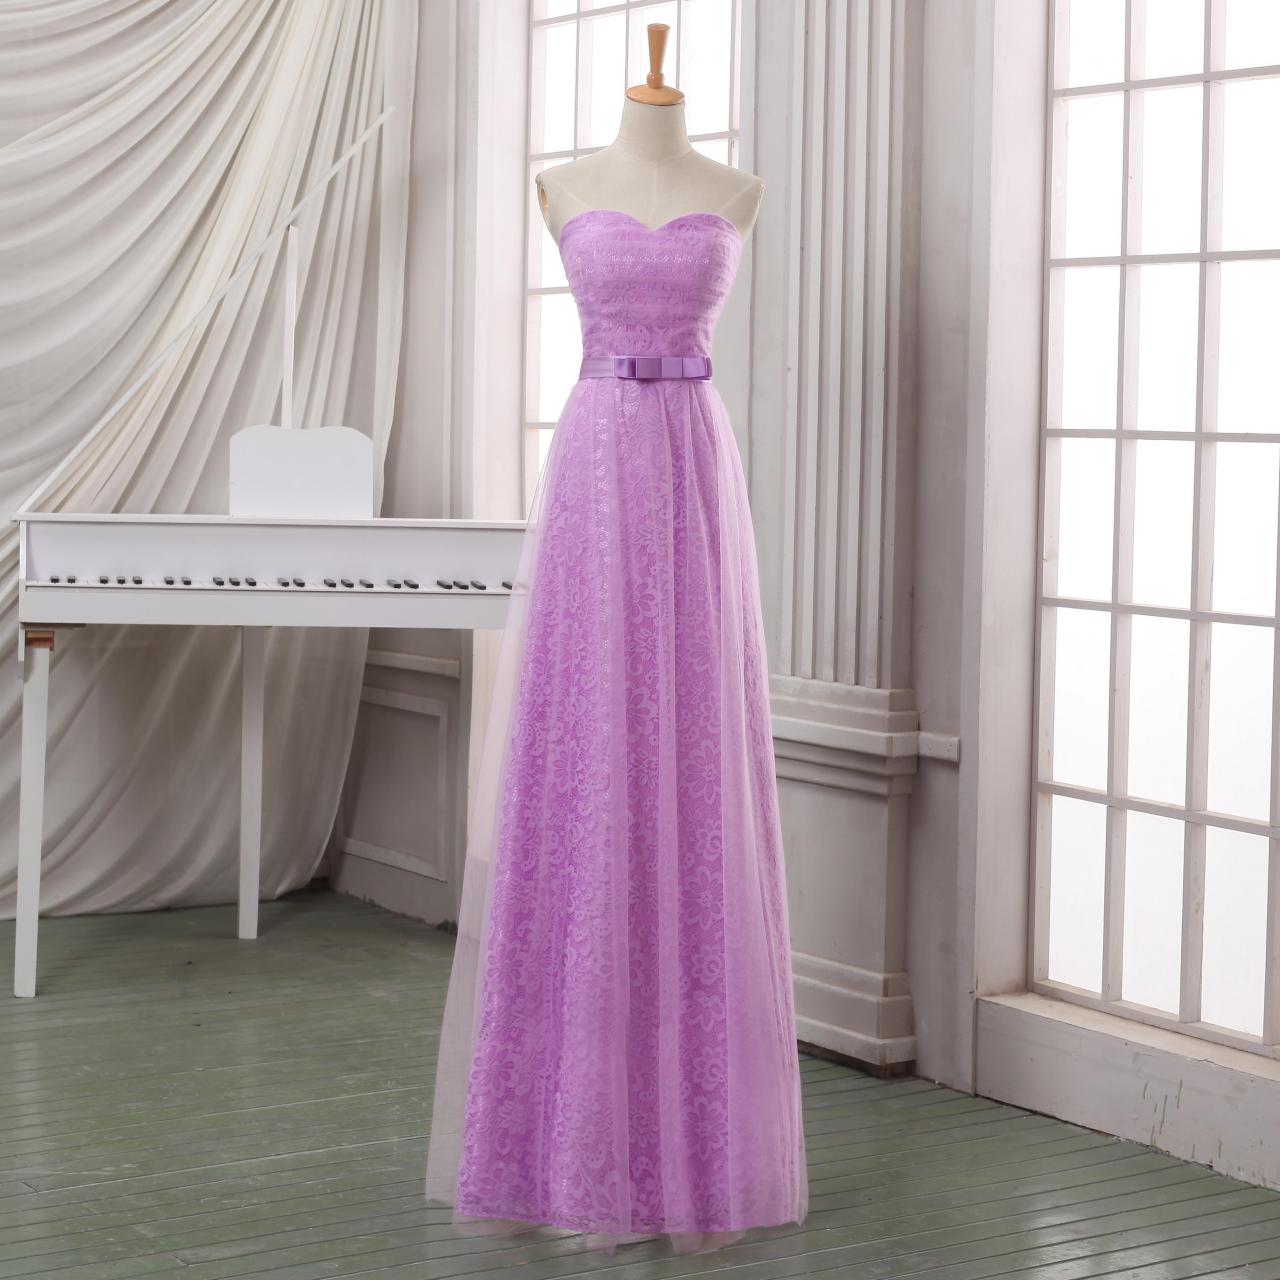 Lilac Long Tulle Homecoming Dress With Sash,handmade Lace Appliqued Homecoming Dress,strapless Sweetheart Homecoming Dress/bridesmaid Dress